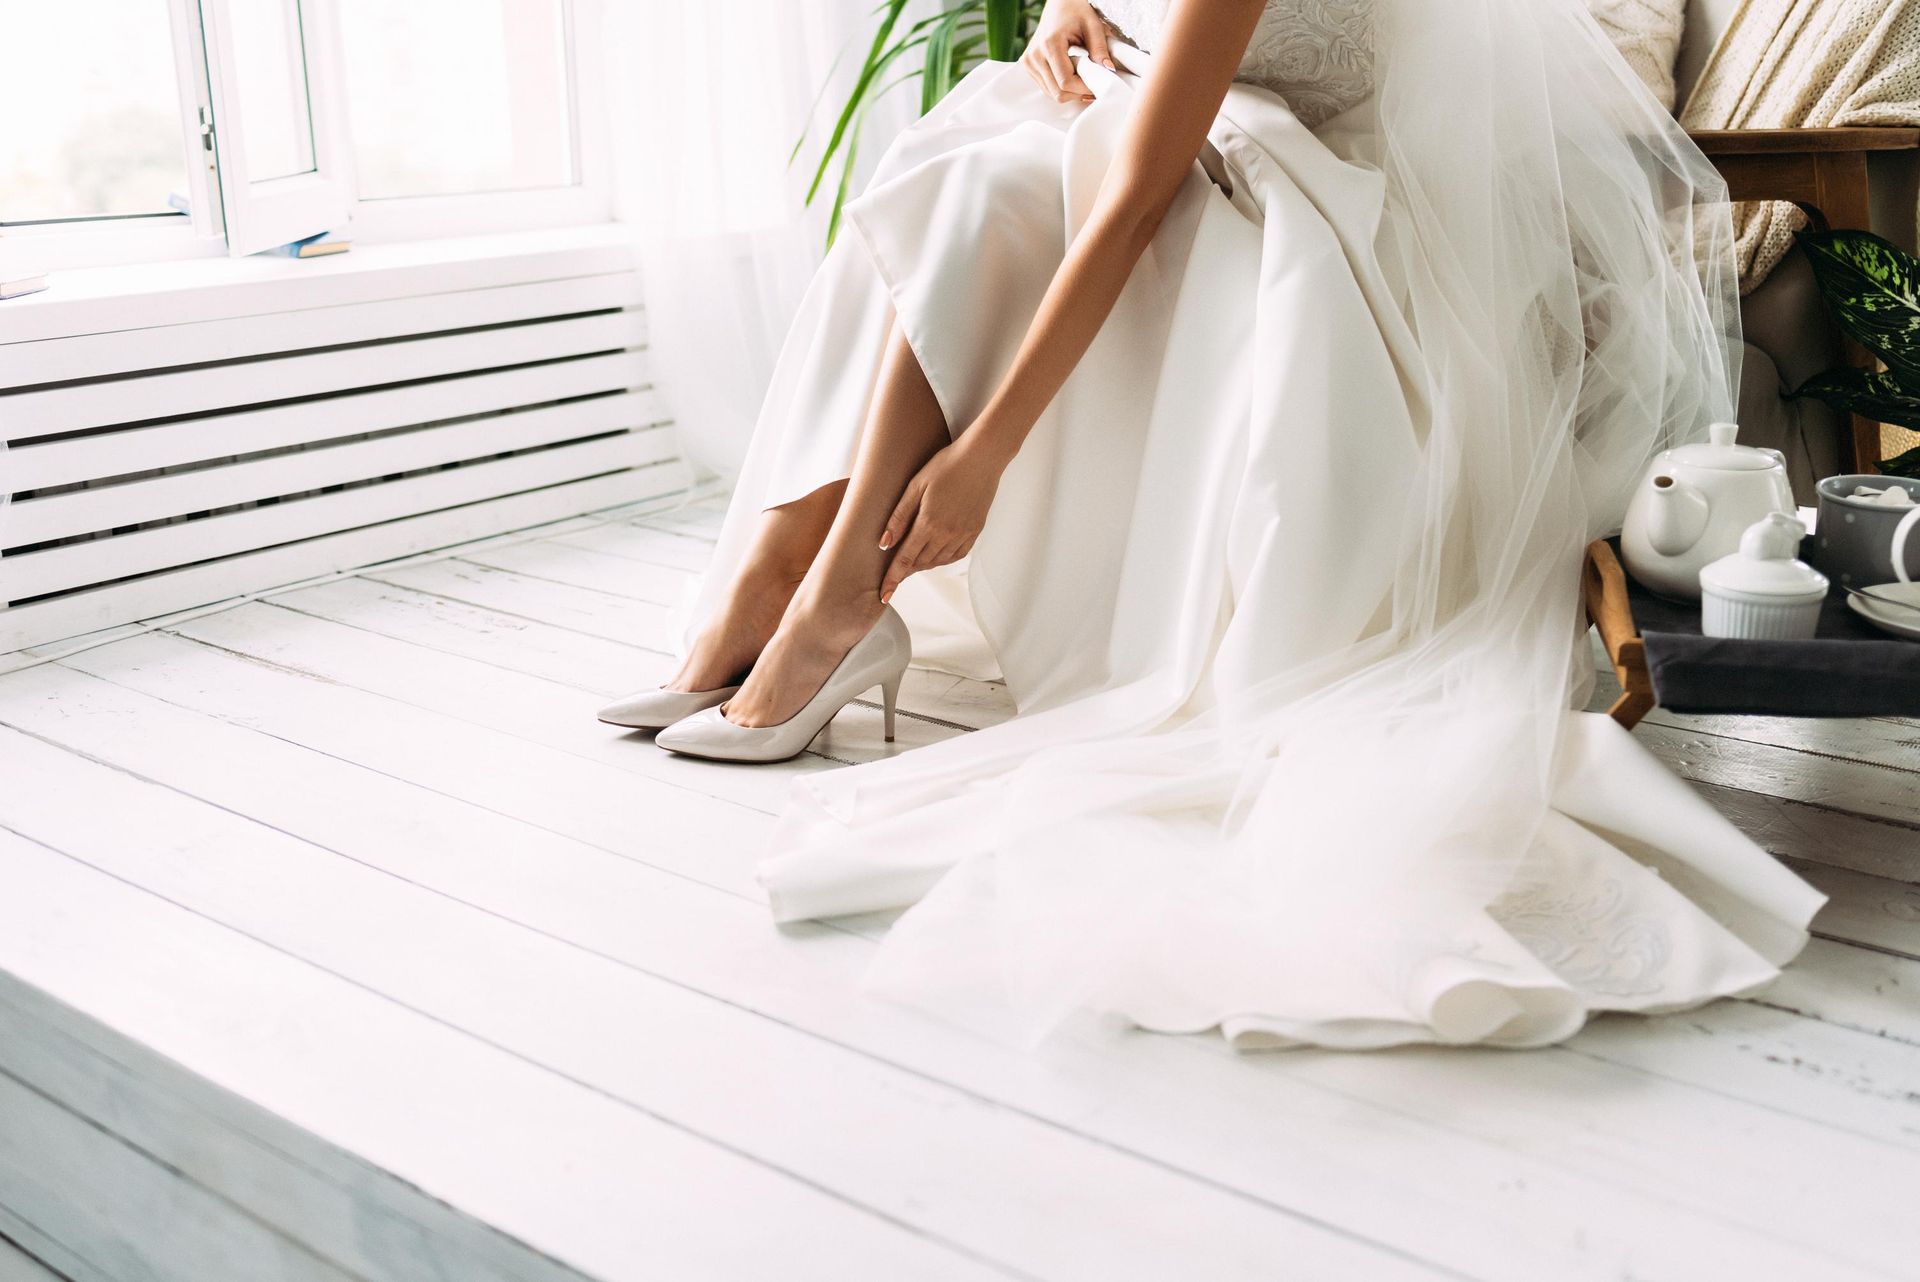 a woman in a wedding dress is sitting on a bench putting on her shoes